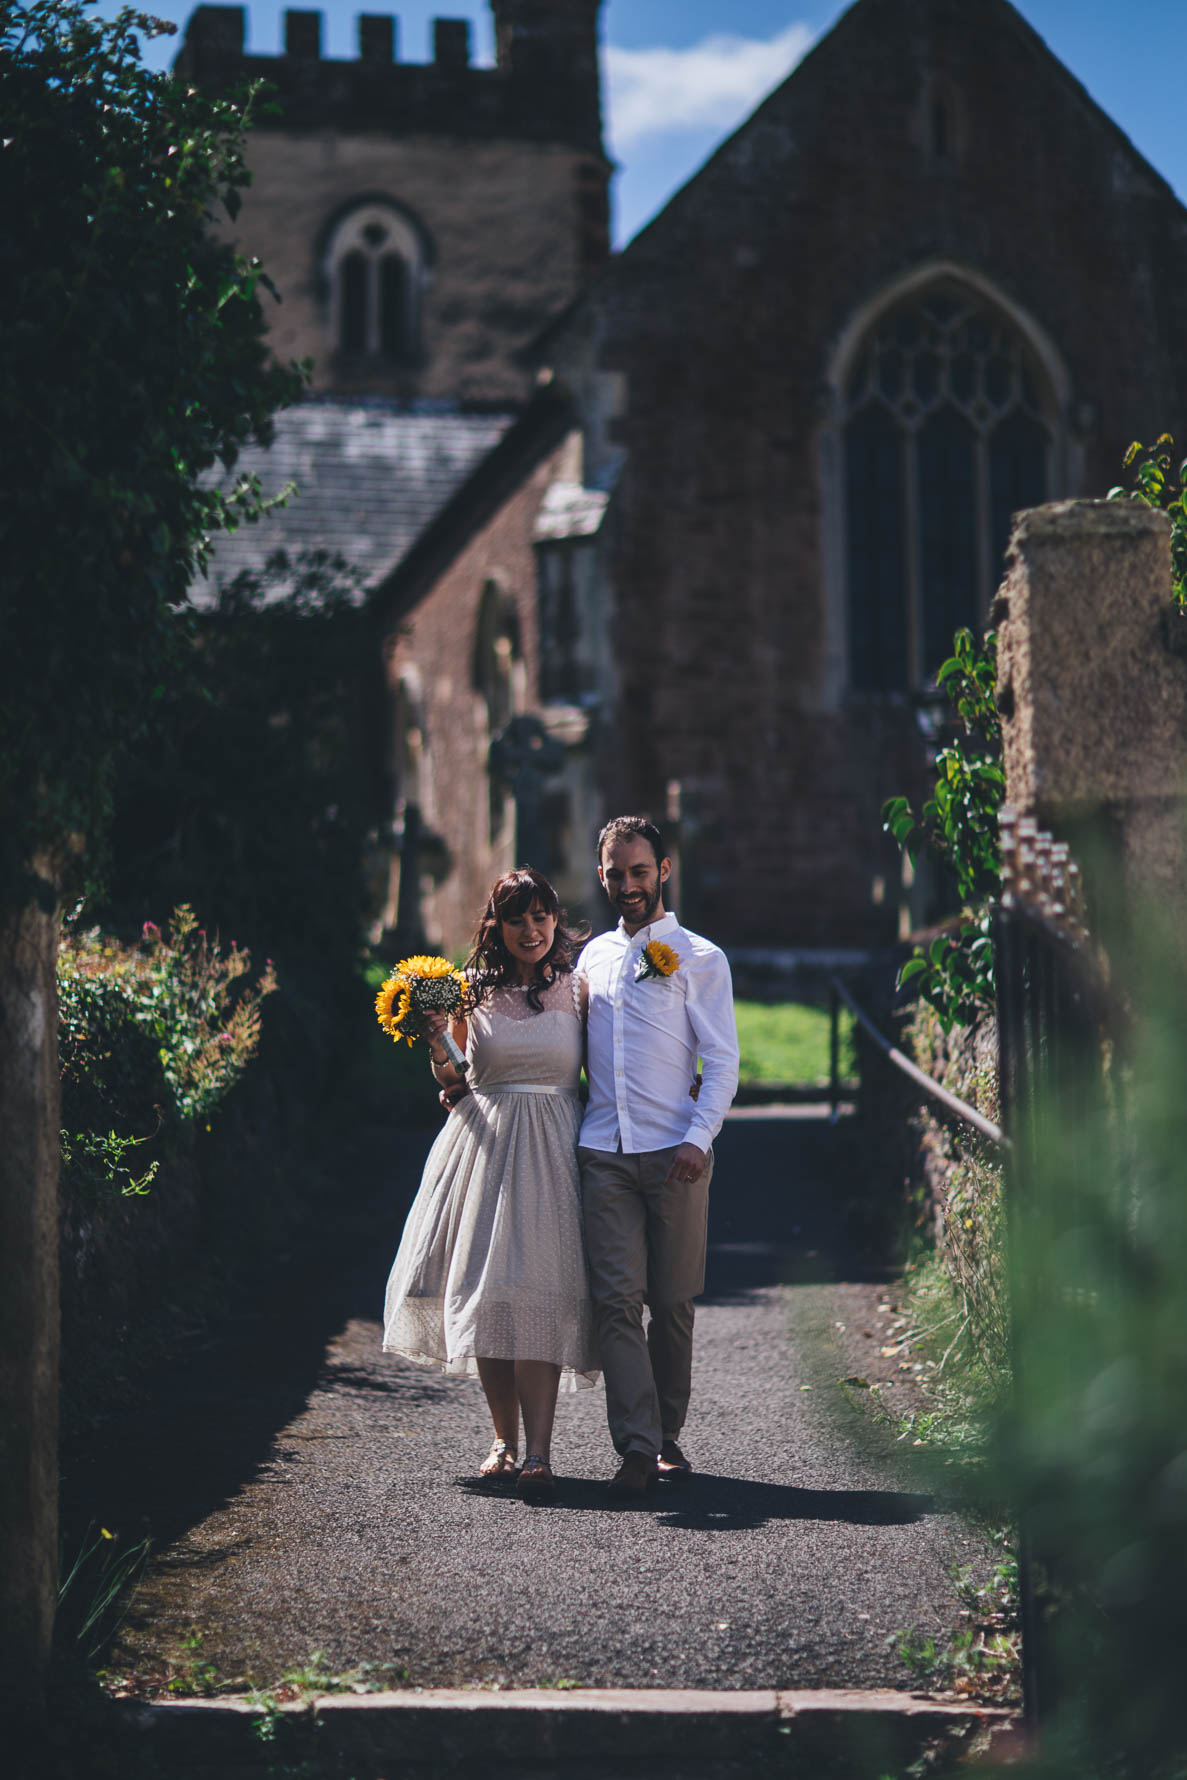 Bride and groom walking down a path in a churchyard away from the church. The groom has his arm around the bride's waist. The bride is holding a bouquet of sunflowers and the groom has a sunflower pinned to his white shirt.